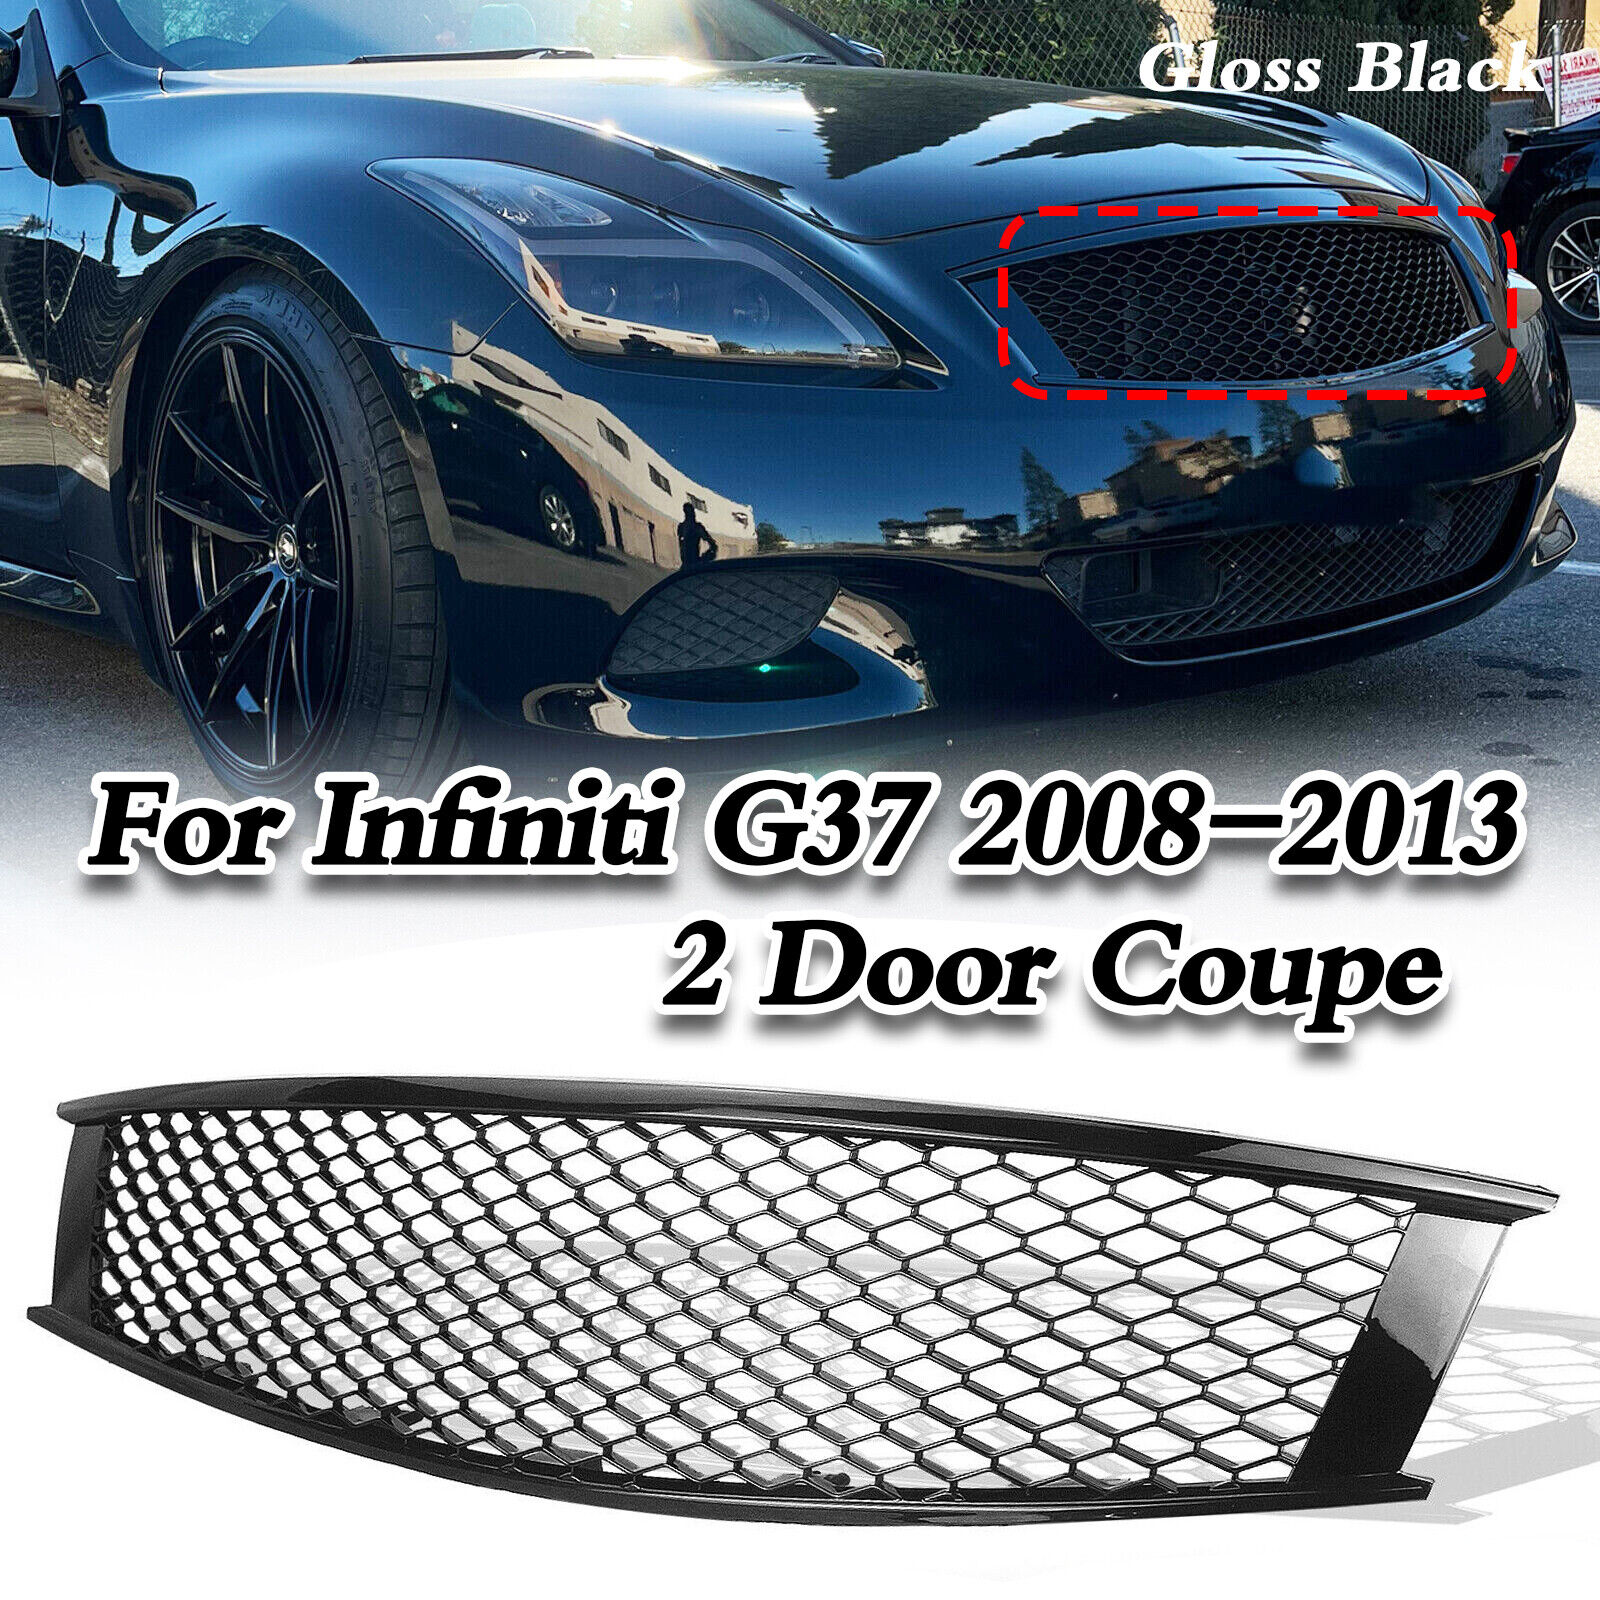 Gloss Black Honeycomb Style Front Bumper Grille For Infiniti G37 2008-2013 2Door